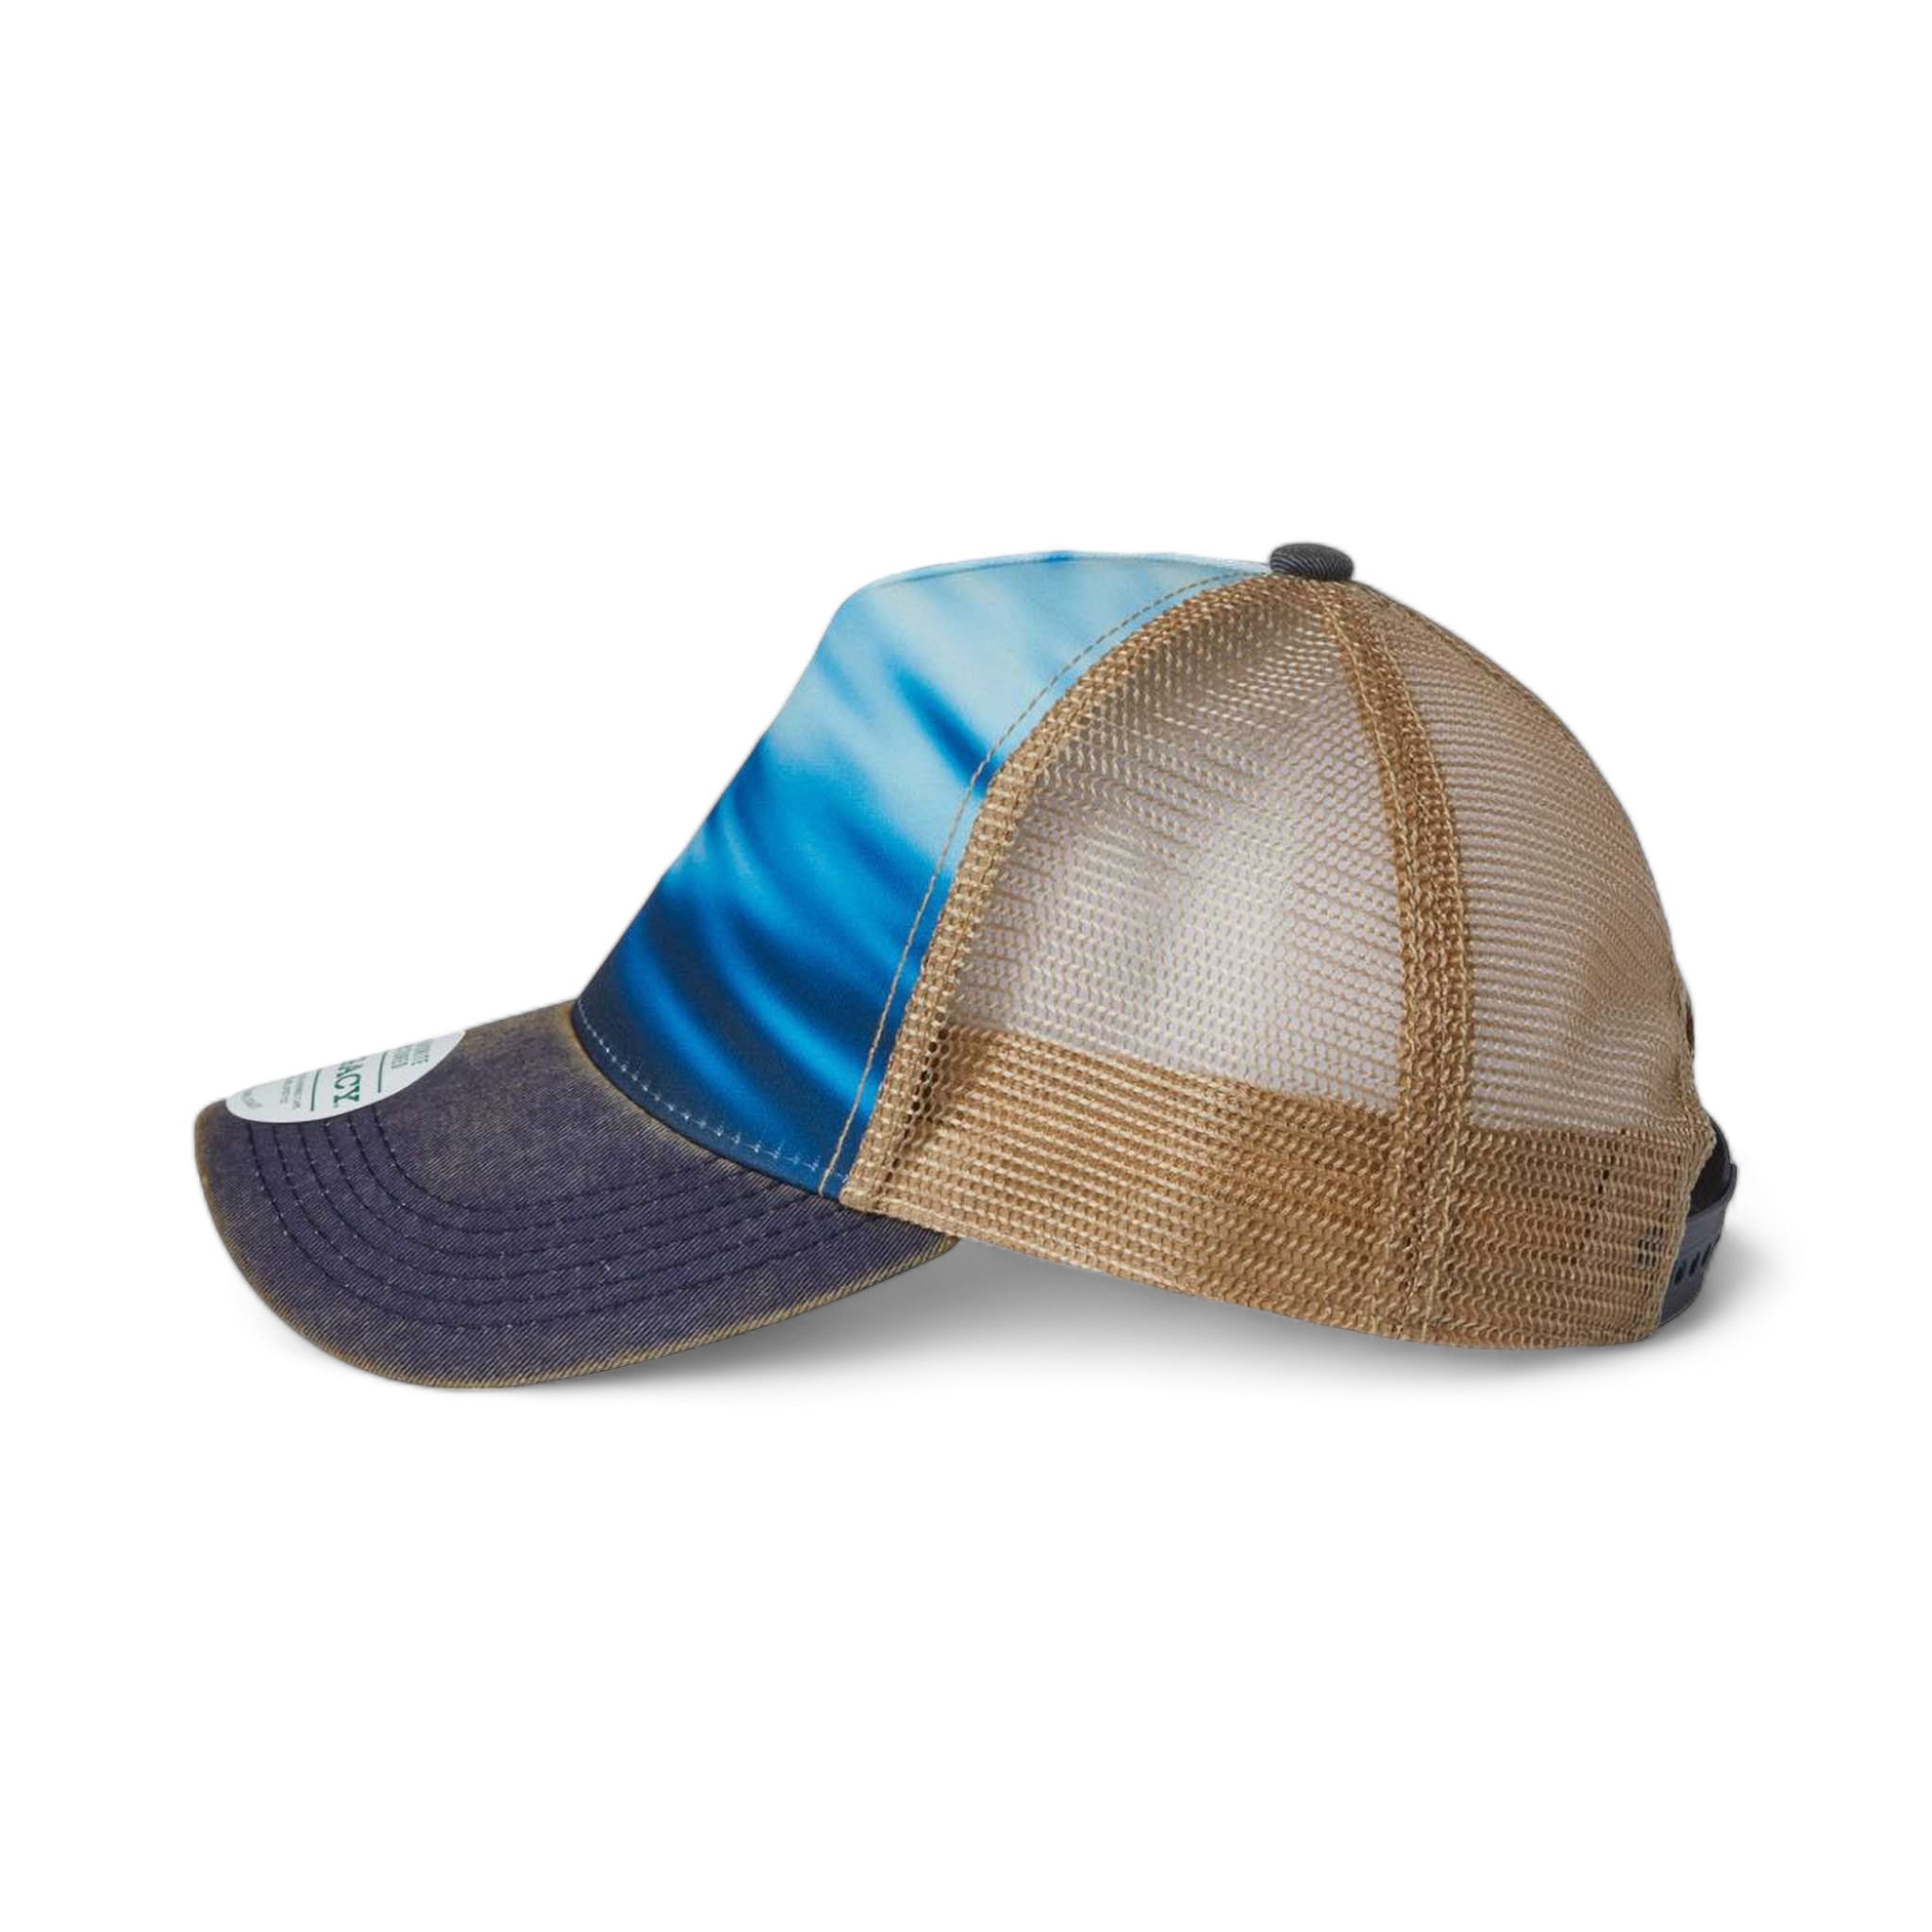 Side view of LEGACY OFAFP custom hat in calm waters, navy and khaki